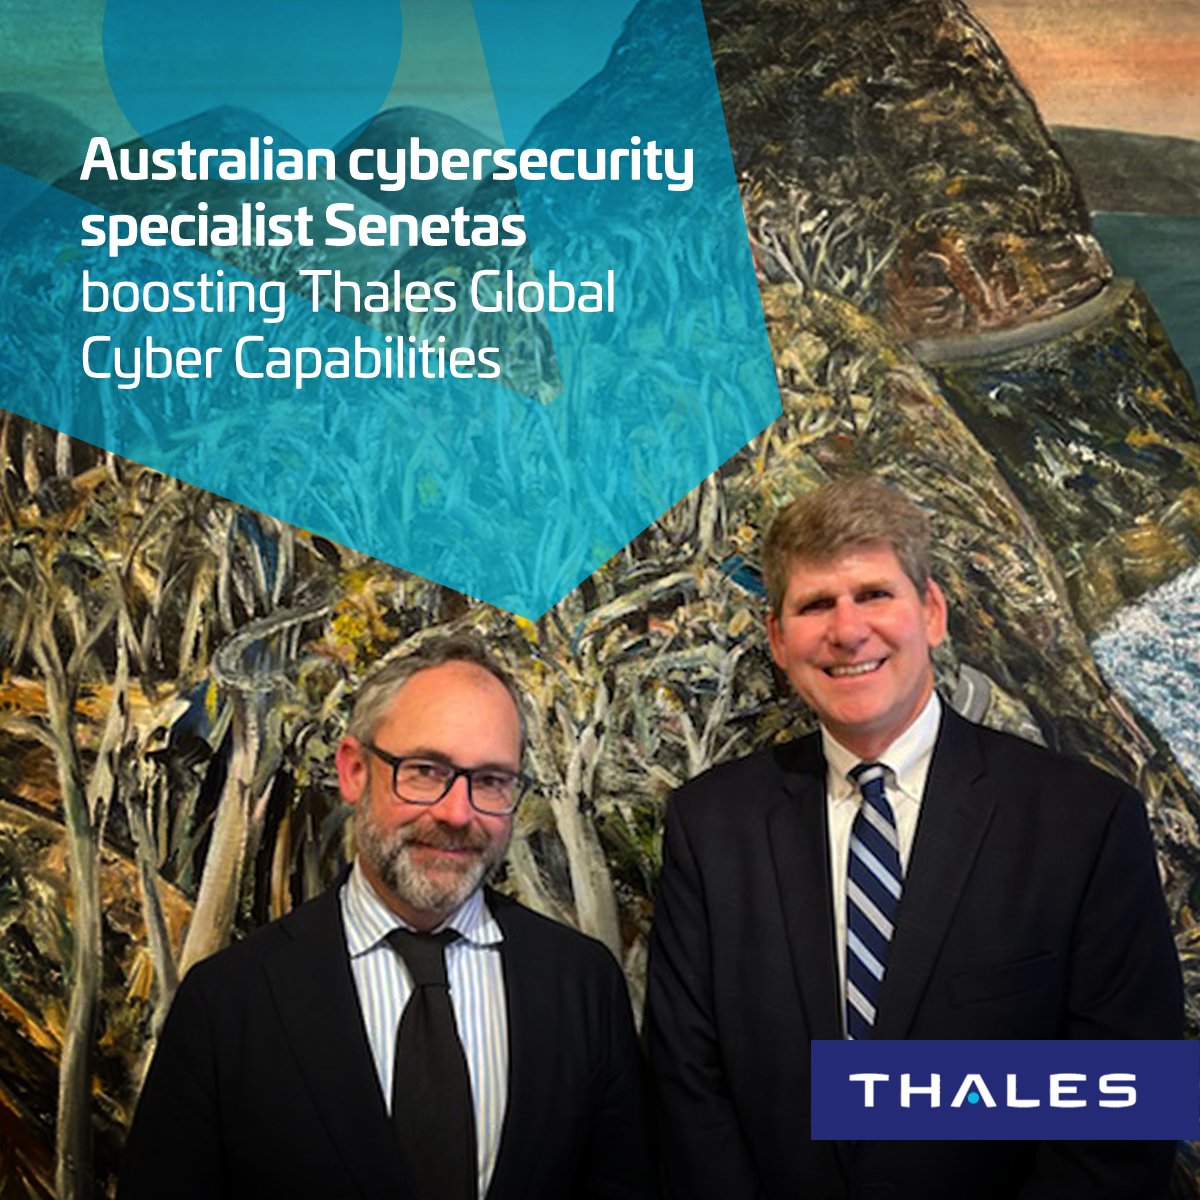 Taking Australian expertise to the world with Melbourne based cybersecurity specialist Senetas. Thales has partnered with @Senetas to deliver network encryption, secure file sharing and anti-malware solutions to our customers globally. Read more thls.co/JZ5550PEbIY